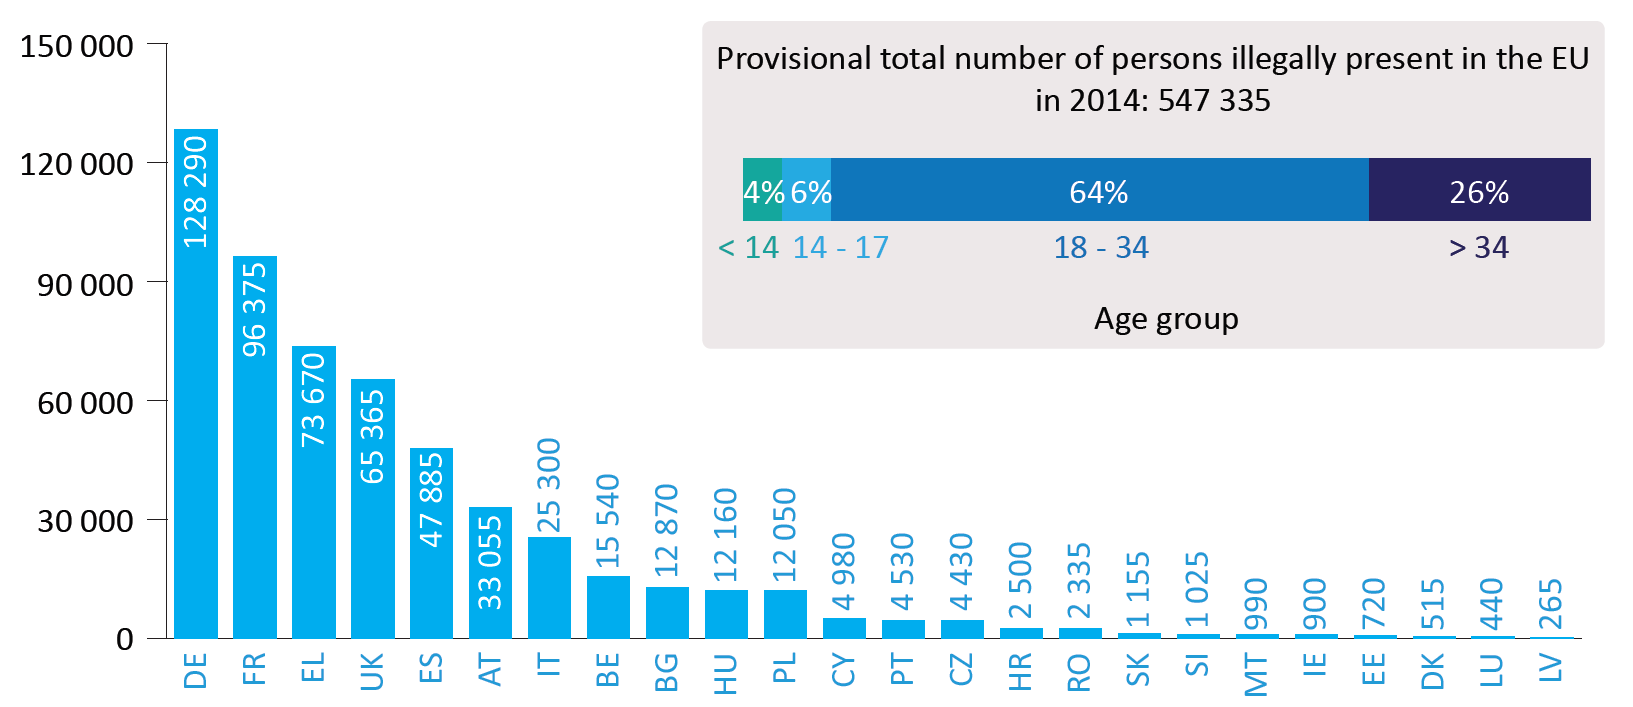 Number of persons found to be illegally present in EU Member States (2014)